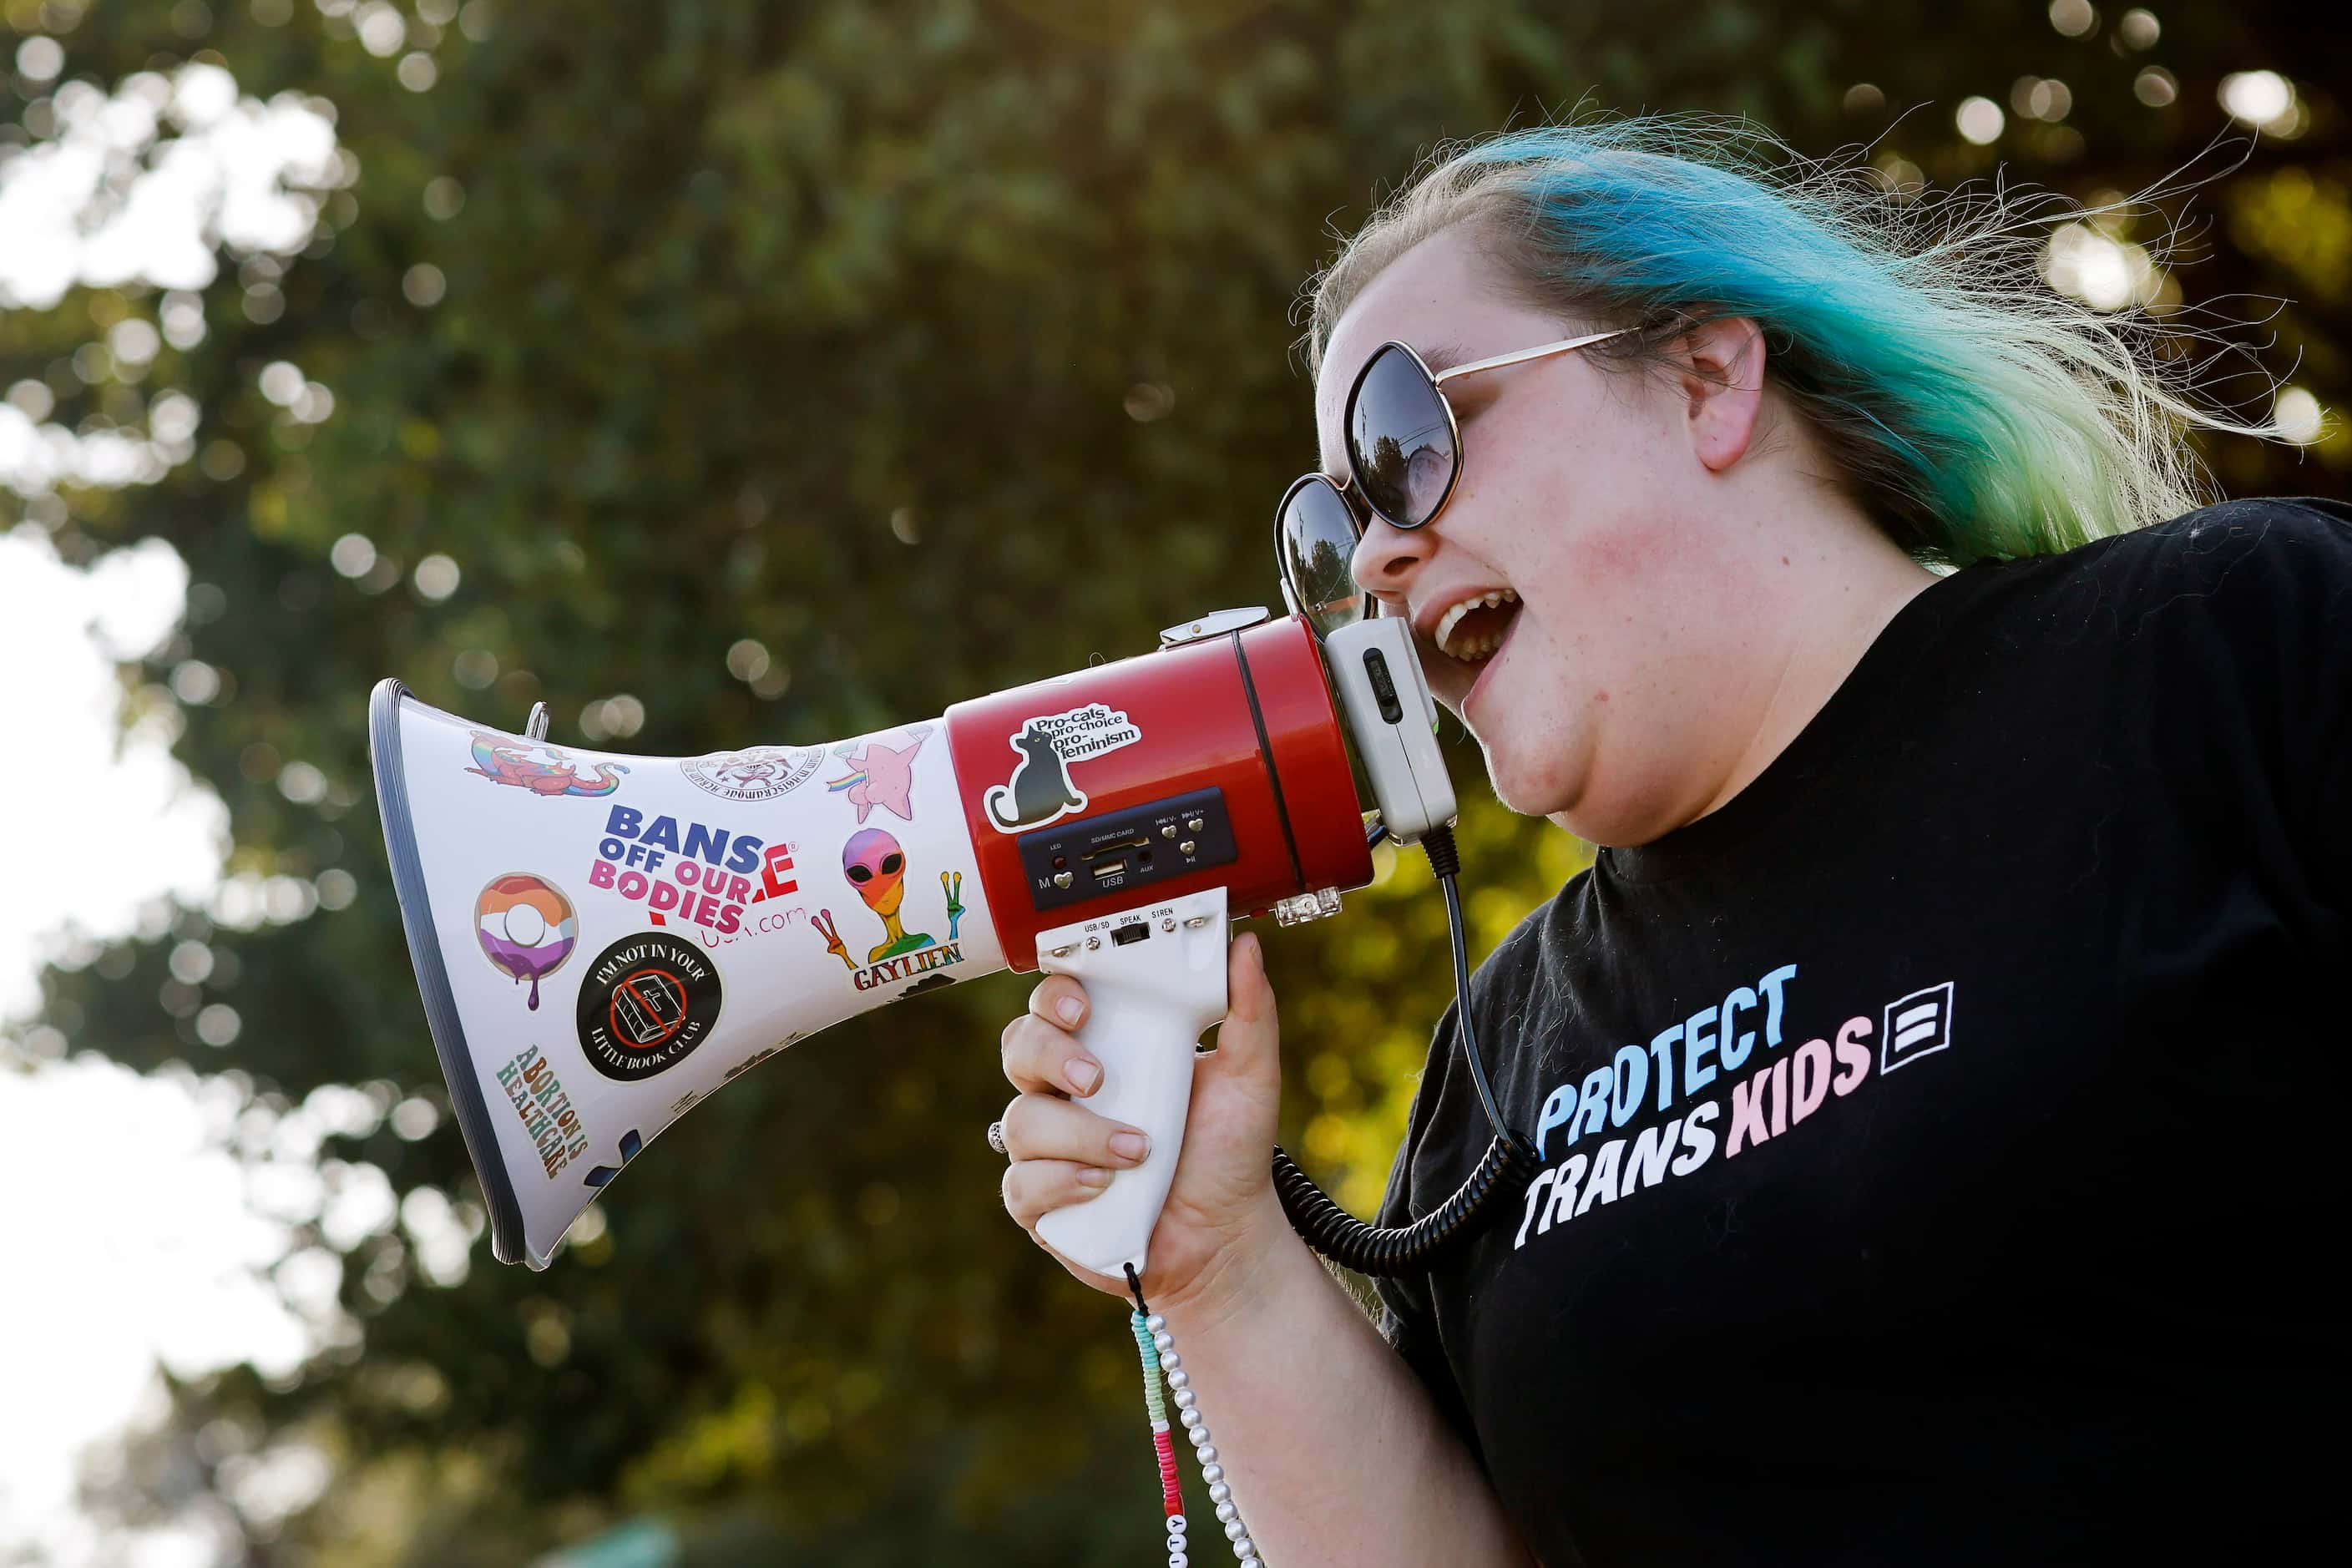 Protestor Erica Knight of No Hate In Texas uses a bullhorn to chant and yell at New...